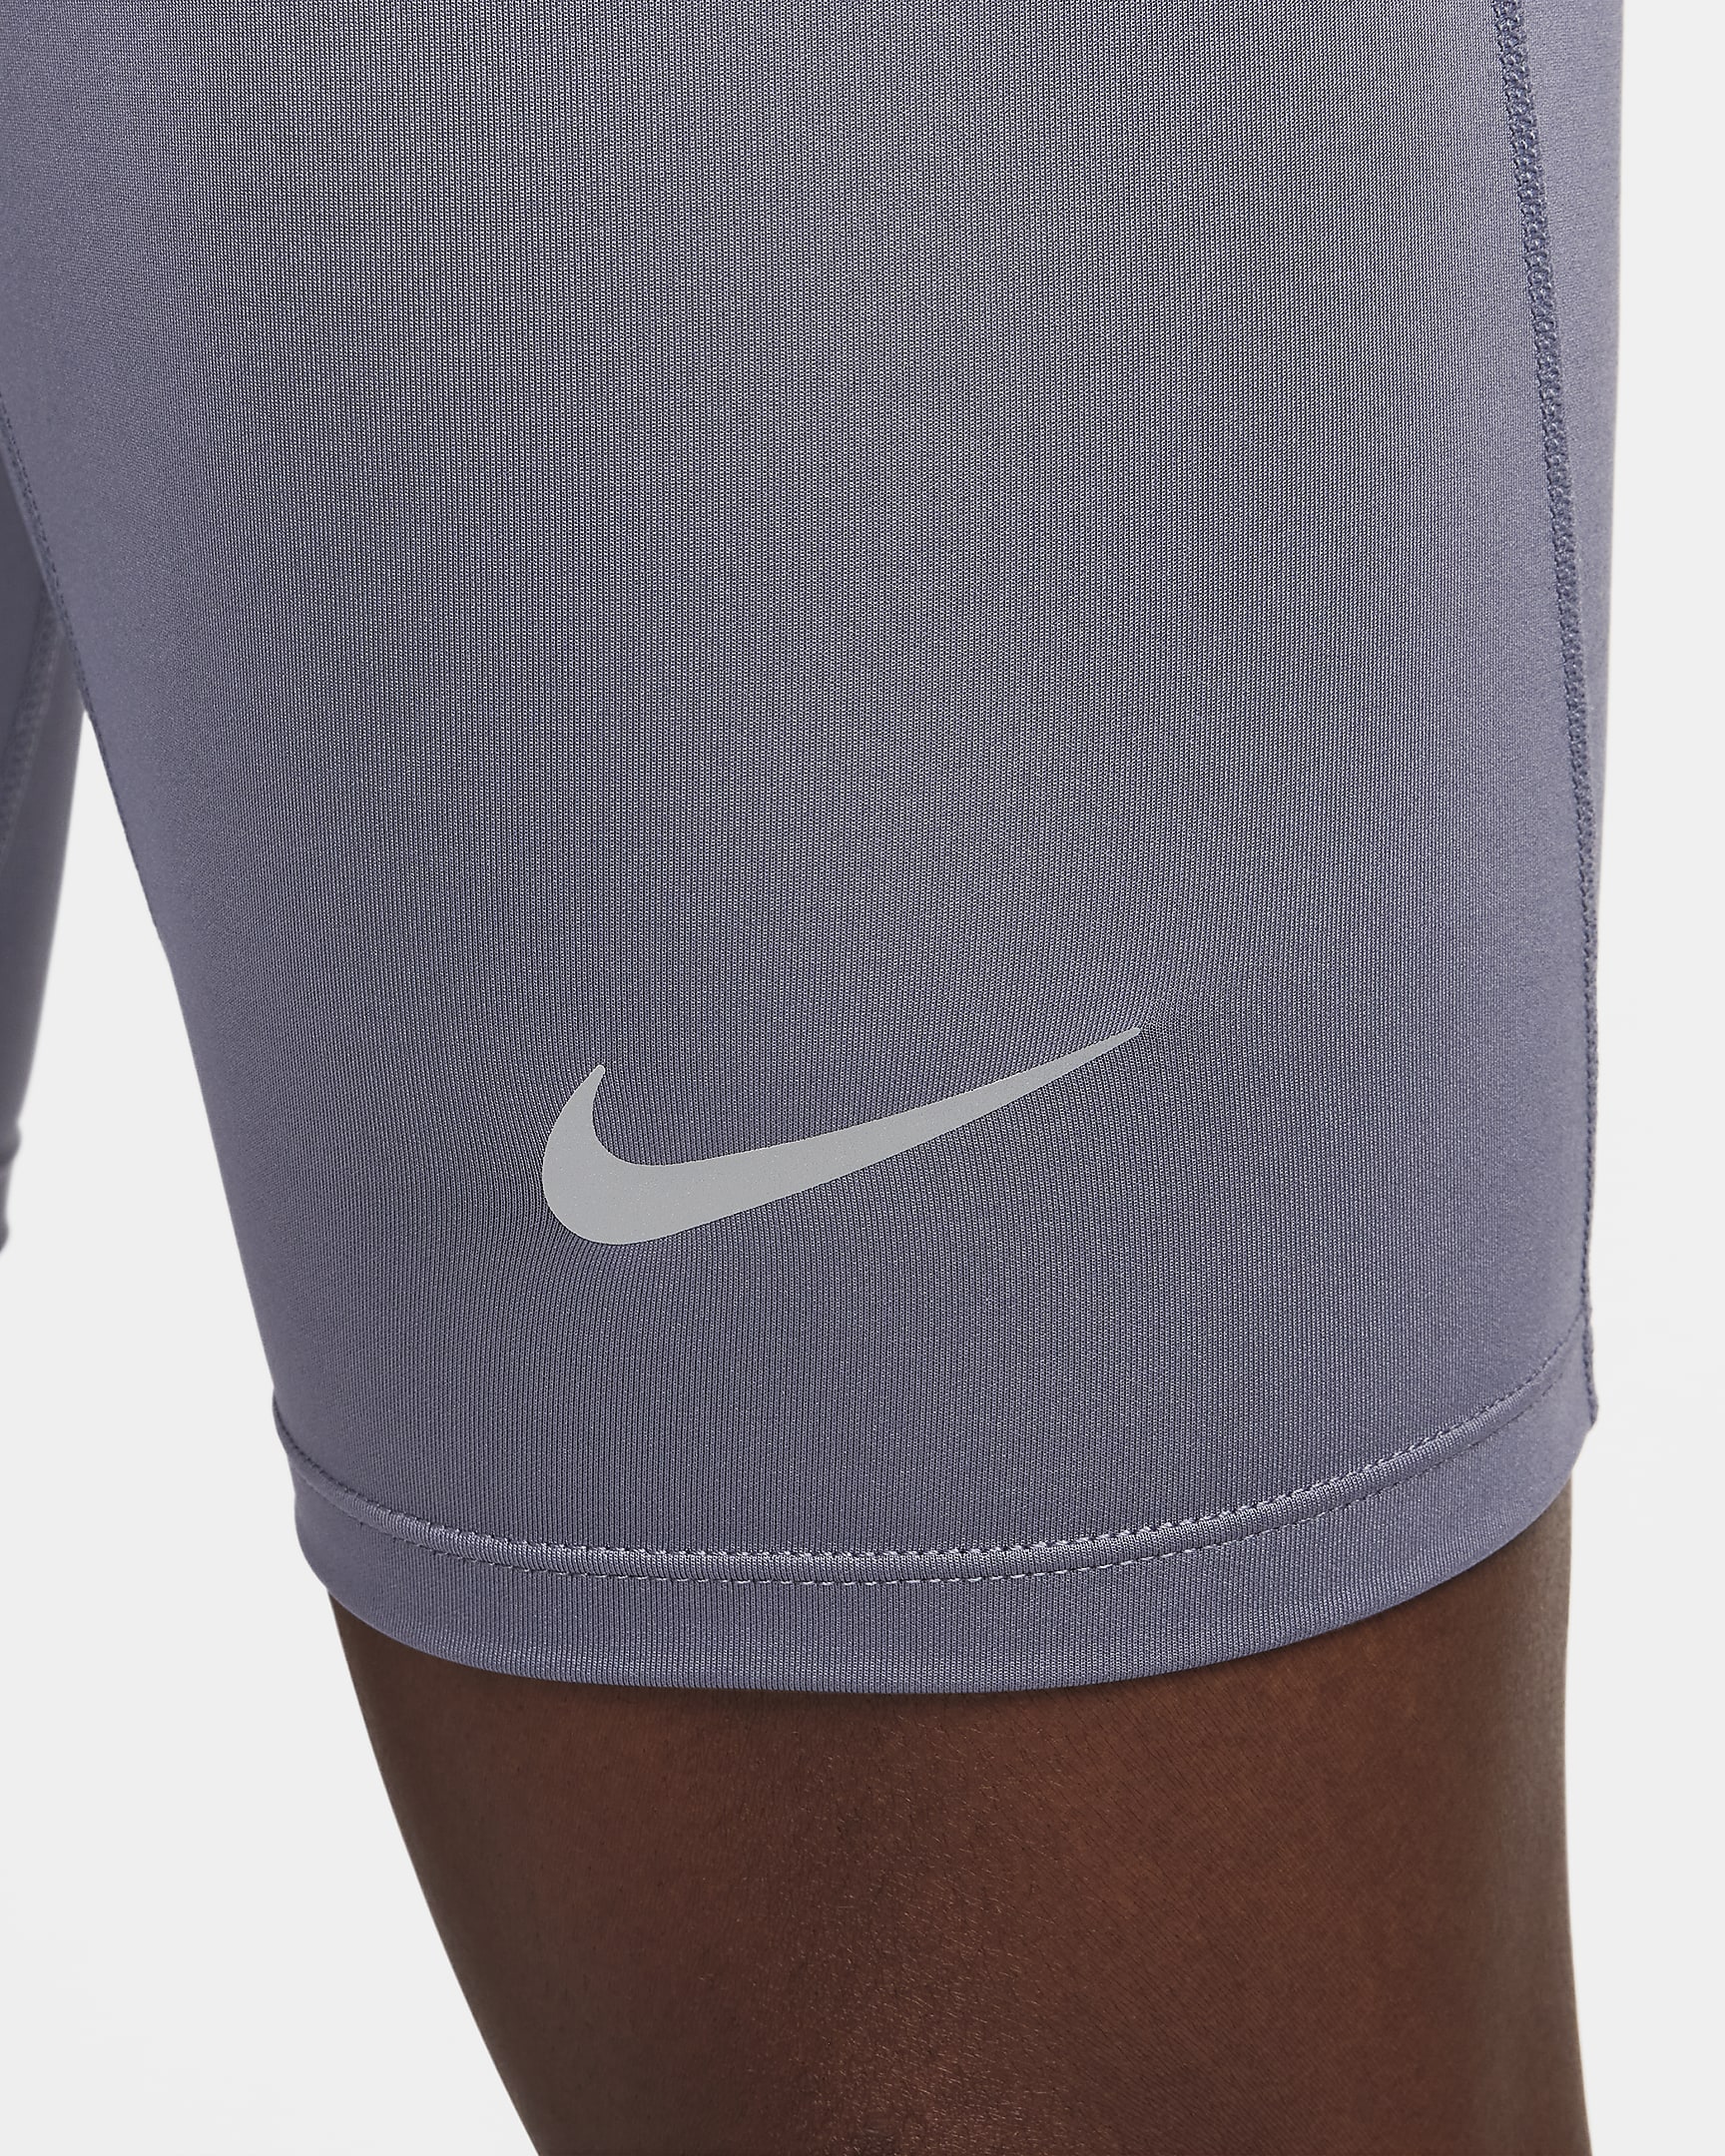 Nike Fast Men's Dri-FIT Brief-Lined Running 1/2-Length Tights. Nike.com